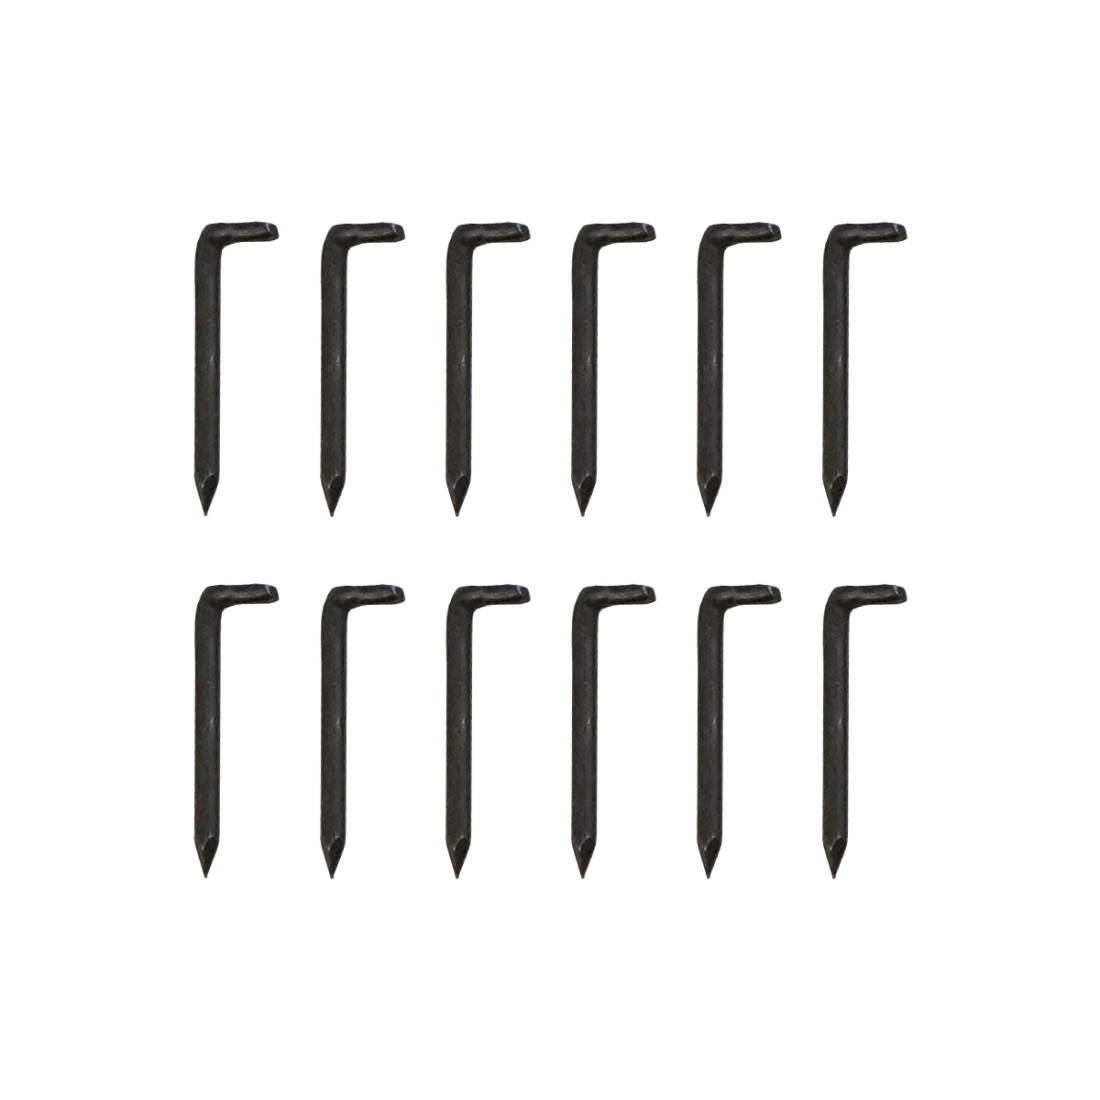 Railroad Spikes - 12 Pack